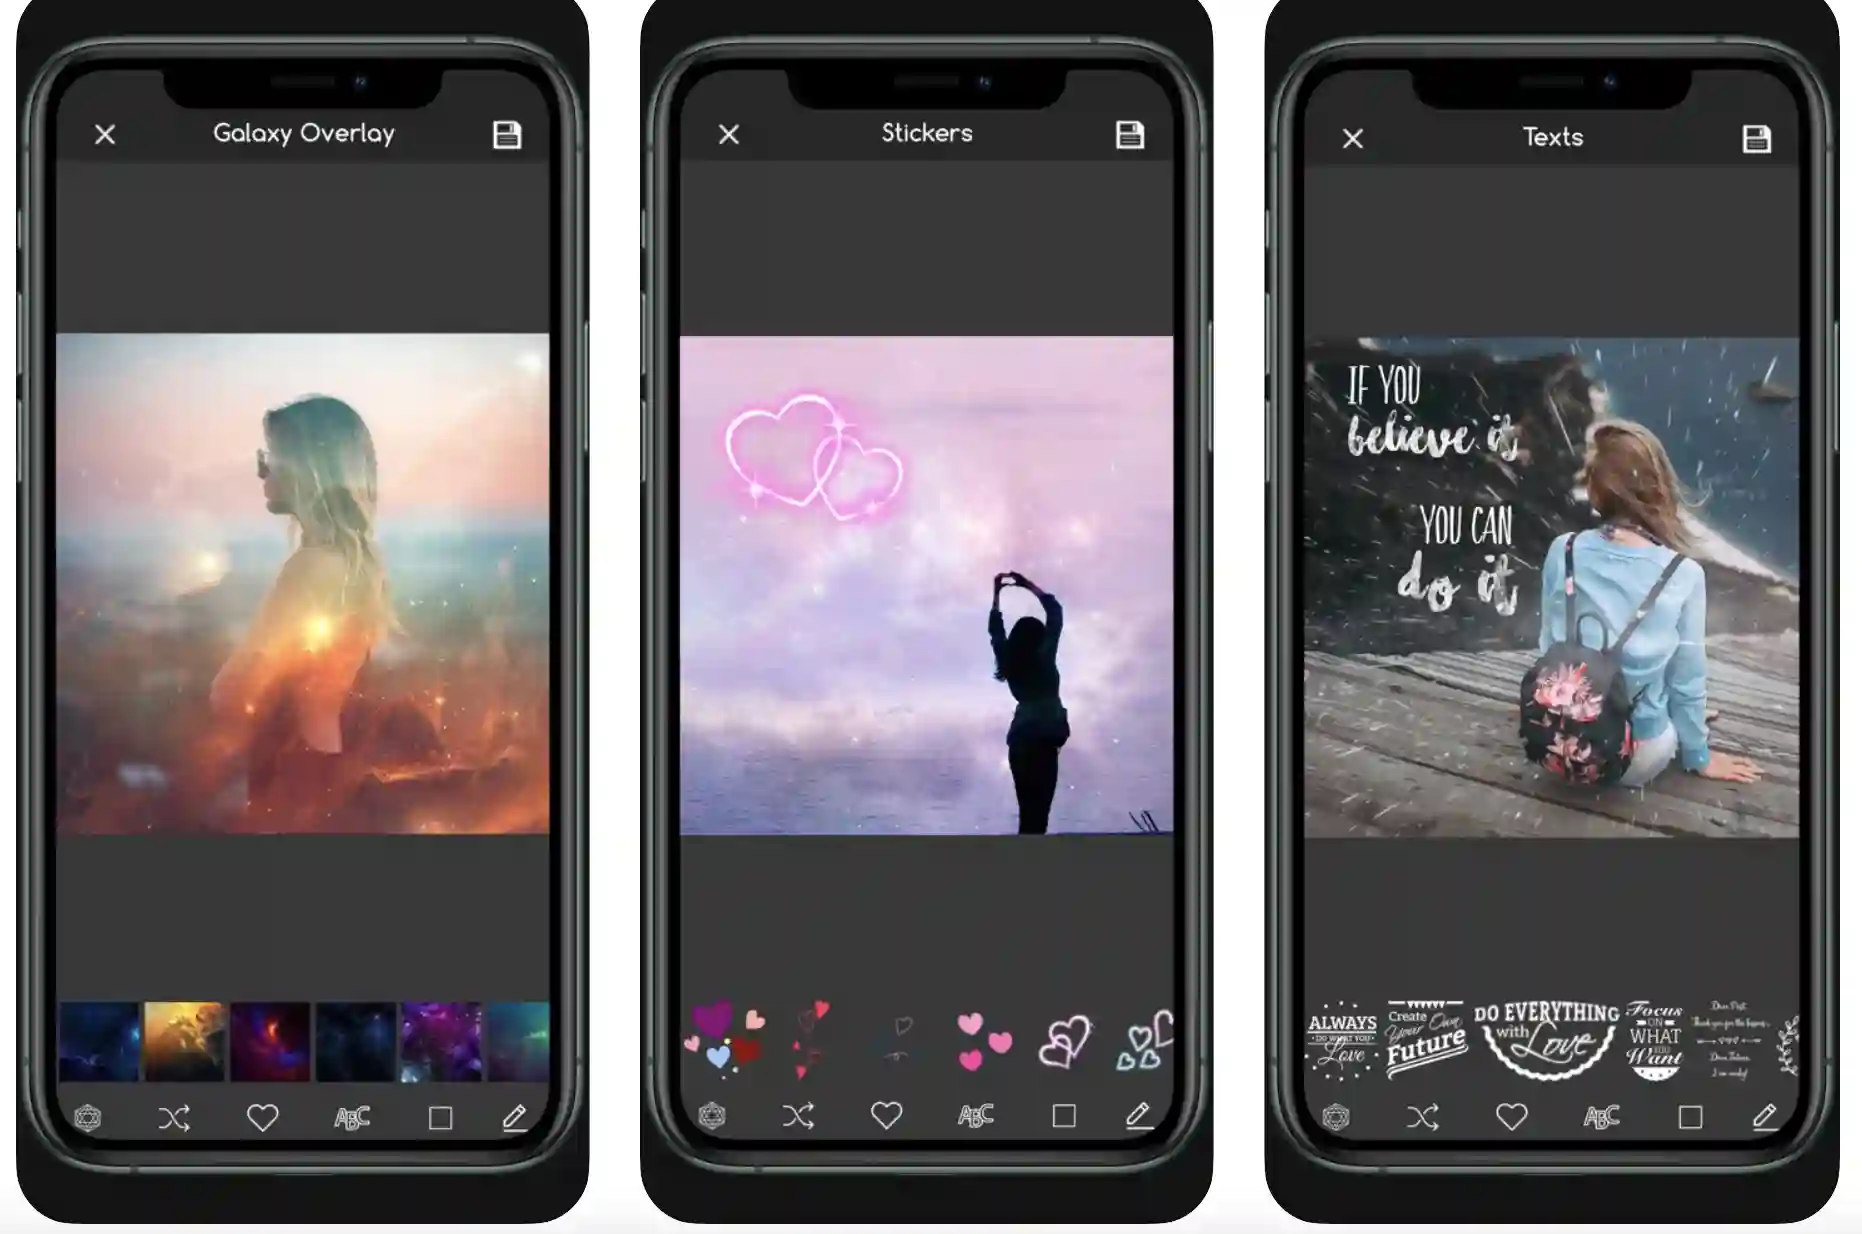 11 Best Blending Photo Apps To Blend Photos in Seconds